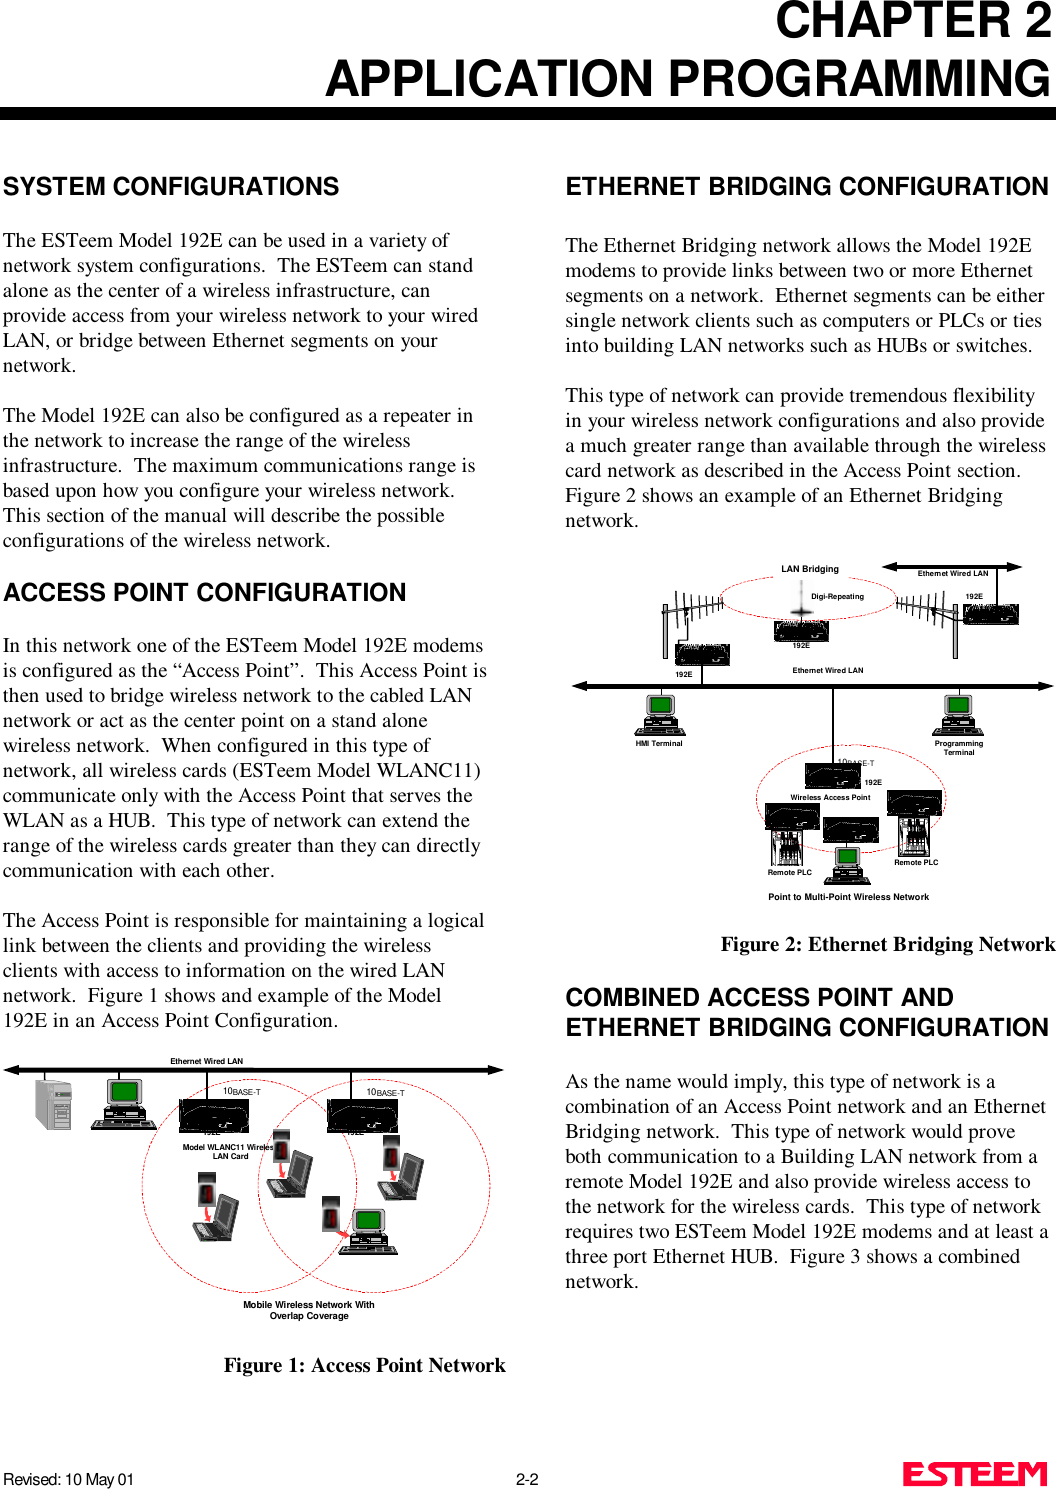 CHAPTER 2APPLICATION PROGRAMMINGRevised: 10 May 01 2-2SYSTEM CONFIGURATIONSThe ESTeem Model 192E can be used in a variety ofnetwork system configurations.  The ESTeem can standalone as the center of a wireless infrastructure, canprovide access from your wireless network to your wiredLAN, or bridge between Ethernet segments on yournetwork.The Model 192E can also be configured as a repeater inthe network to increase the range of the wirelessinfrastructure.  The maximum communications range isbased upon how you configure your wireless network. This section of the manual will describe the possibleconfigurations of the wireless network.ACCESS POINT CONFIGURATIONIn this network one of the ESTeem Model 192E modemsis configured as the “Access Point”.  This Access Point isthen used to bridge wireless network to the cabled LANnetwork or act as the center point on a stand alonewireless network.  When configured in this type ofnetwork, all wireless cards (ESTeem Model WLANC11)communicate only with the Access Point that serves theWLAN as a HUB.  This type of network can extend therange of the wireless cards greater than they can directlycommunication with each other. The Access Point is responsible for maintaining a logicallink between the clients and providing the wirelessclients with access to information on the wired LANnetwork.  Figure 1 shows and example of the Model192E in an Access Point Configuration.ETHERNET BRIDGING CONFIGURATIONThe Ethernet Bridging network allows the Model 192Emodems to provide links between two or more Ethernetsegments on a network.  Ethernet segments can be eithersingle network clients such as computers or PLCs or tiesinto building LAN networks such as HUBs or switches.This type of network can provide tremendous flexibilityin your wireless network configurations and also providea much greater range than available through the wirelesscard network as described in the Access Point section. Figure 2 shows an example of an Ethernet Bridgingnetwork.COMBINED ACCESS POINT ANDETHERNET BRIDGING CONFIGURATIONAs the name would imply, this type of network is acombination of an Access Point network and an EthernetBridging network.  This type of network would proveboth communication to a Building LAN network from aremote Model 192E and also provide wireless access tothe network for the wireless cards.  This type of networkrequires two ESTeem Model 192E modems and at least athree port Ethernet HUB.  Figure 3 shows a combinednetwork.Ethernet Wired LANMobile Wireless Network WithOverlap Coverage192EModel WLANC11 WirelessLAN Card192E10BASE-T 10BASE-TFigure 1: Access Point NetworkPoint to Multi-Point Wireless Network10BASE-T192EEthernet Wired LANWireless Access PointProgrammingTerminalHMI TerminalRemote PLCRemote PLC192E192EEthernet Wired LANLAN BridgingDigi-Repeating192EFigure 2: Ethernet Bridging Network